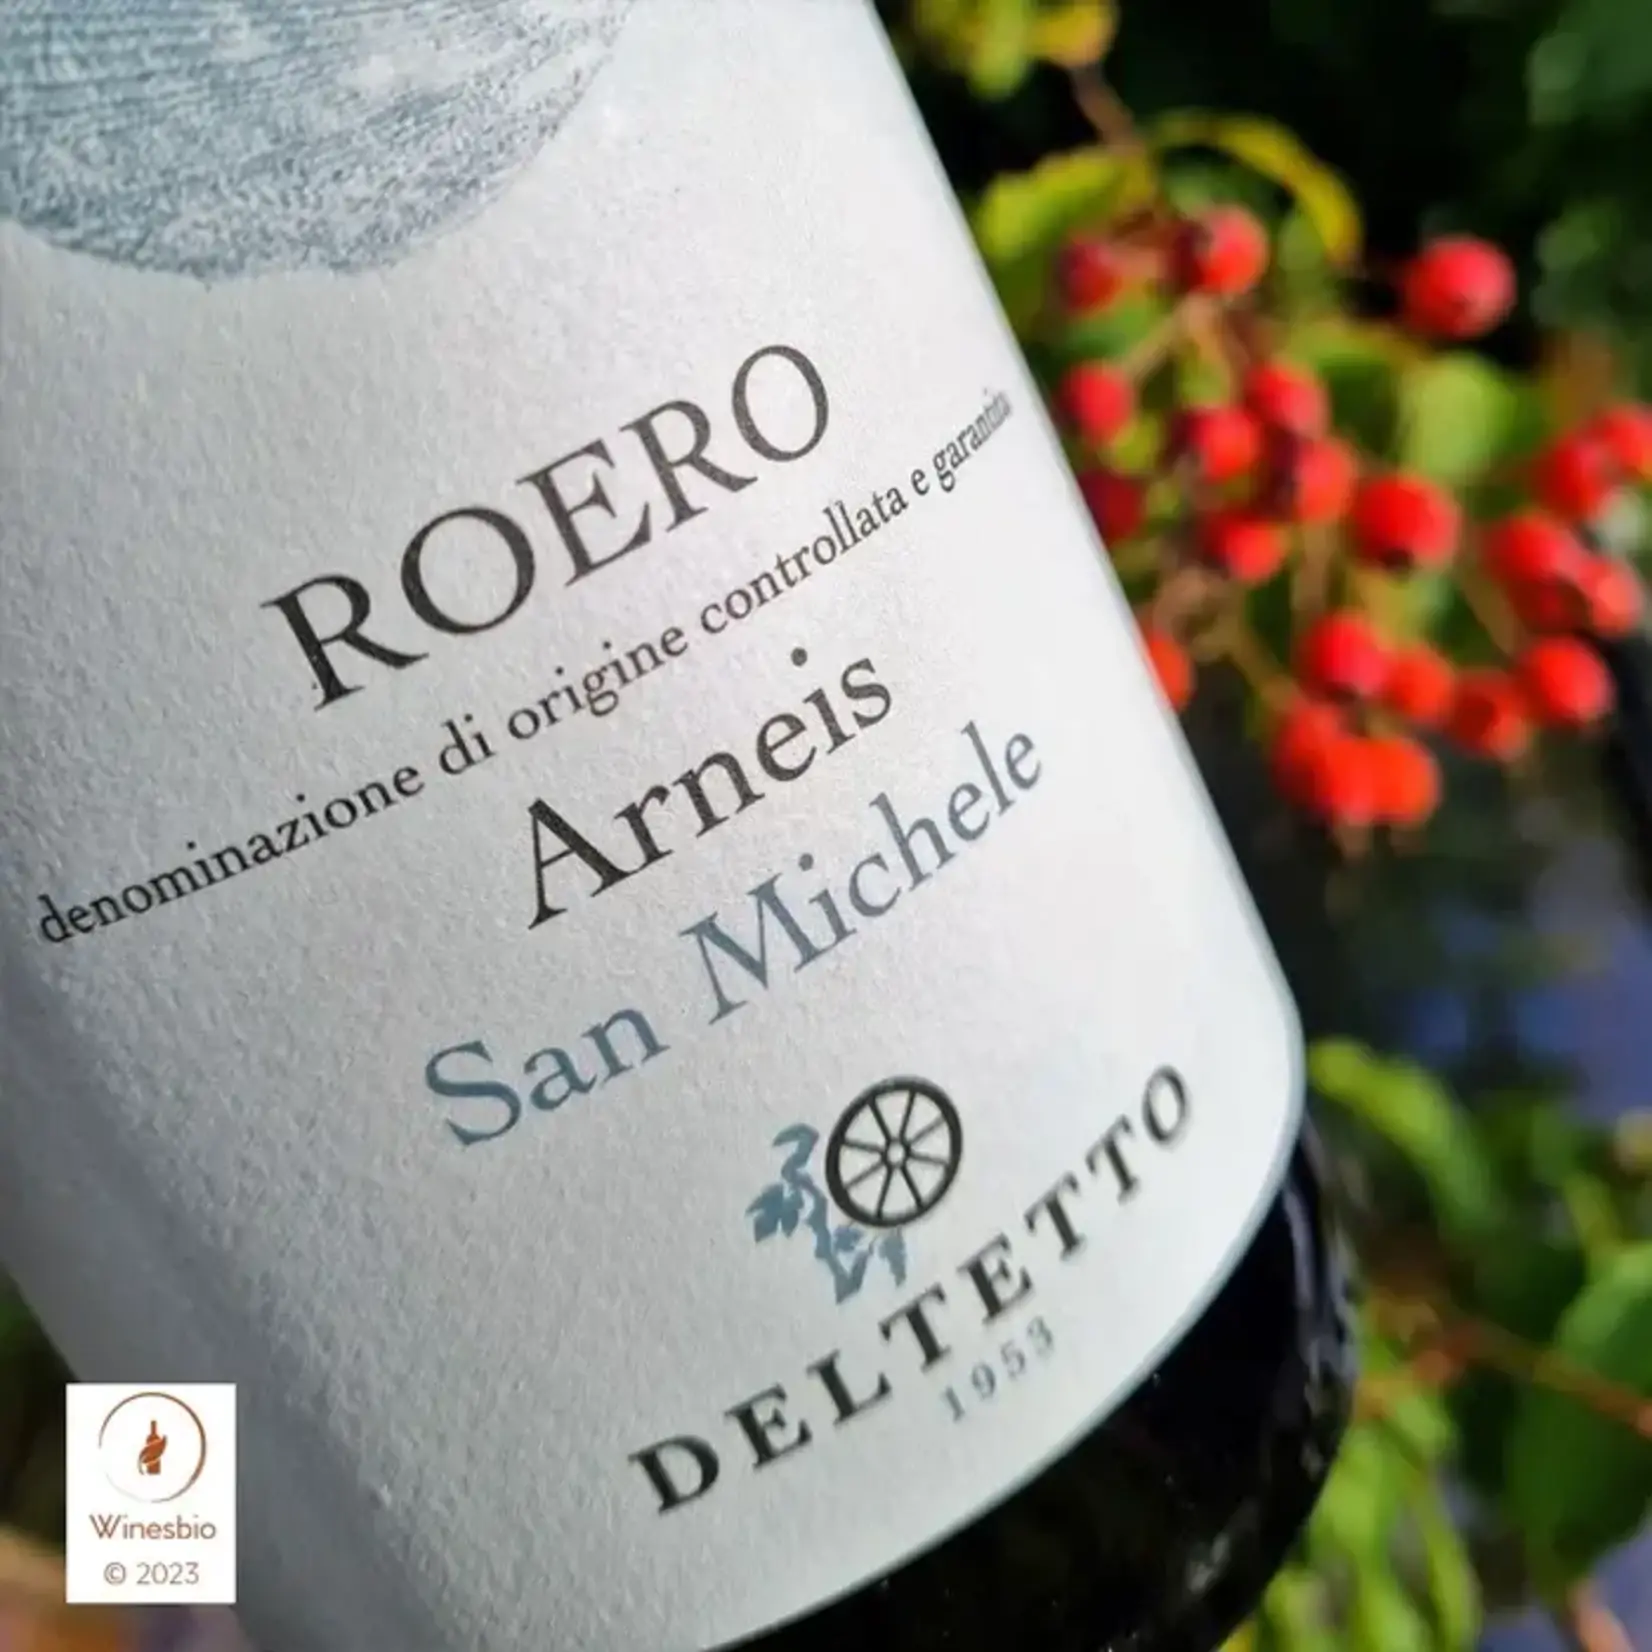 Deltetto Roero Arneis San Michele Made with Organic Grapes DOCG Italy